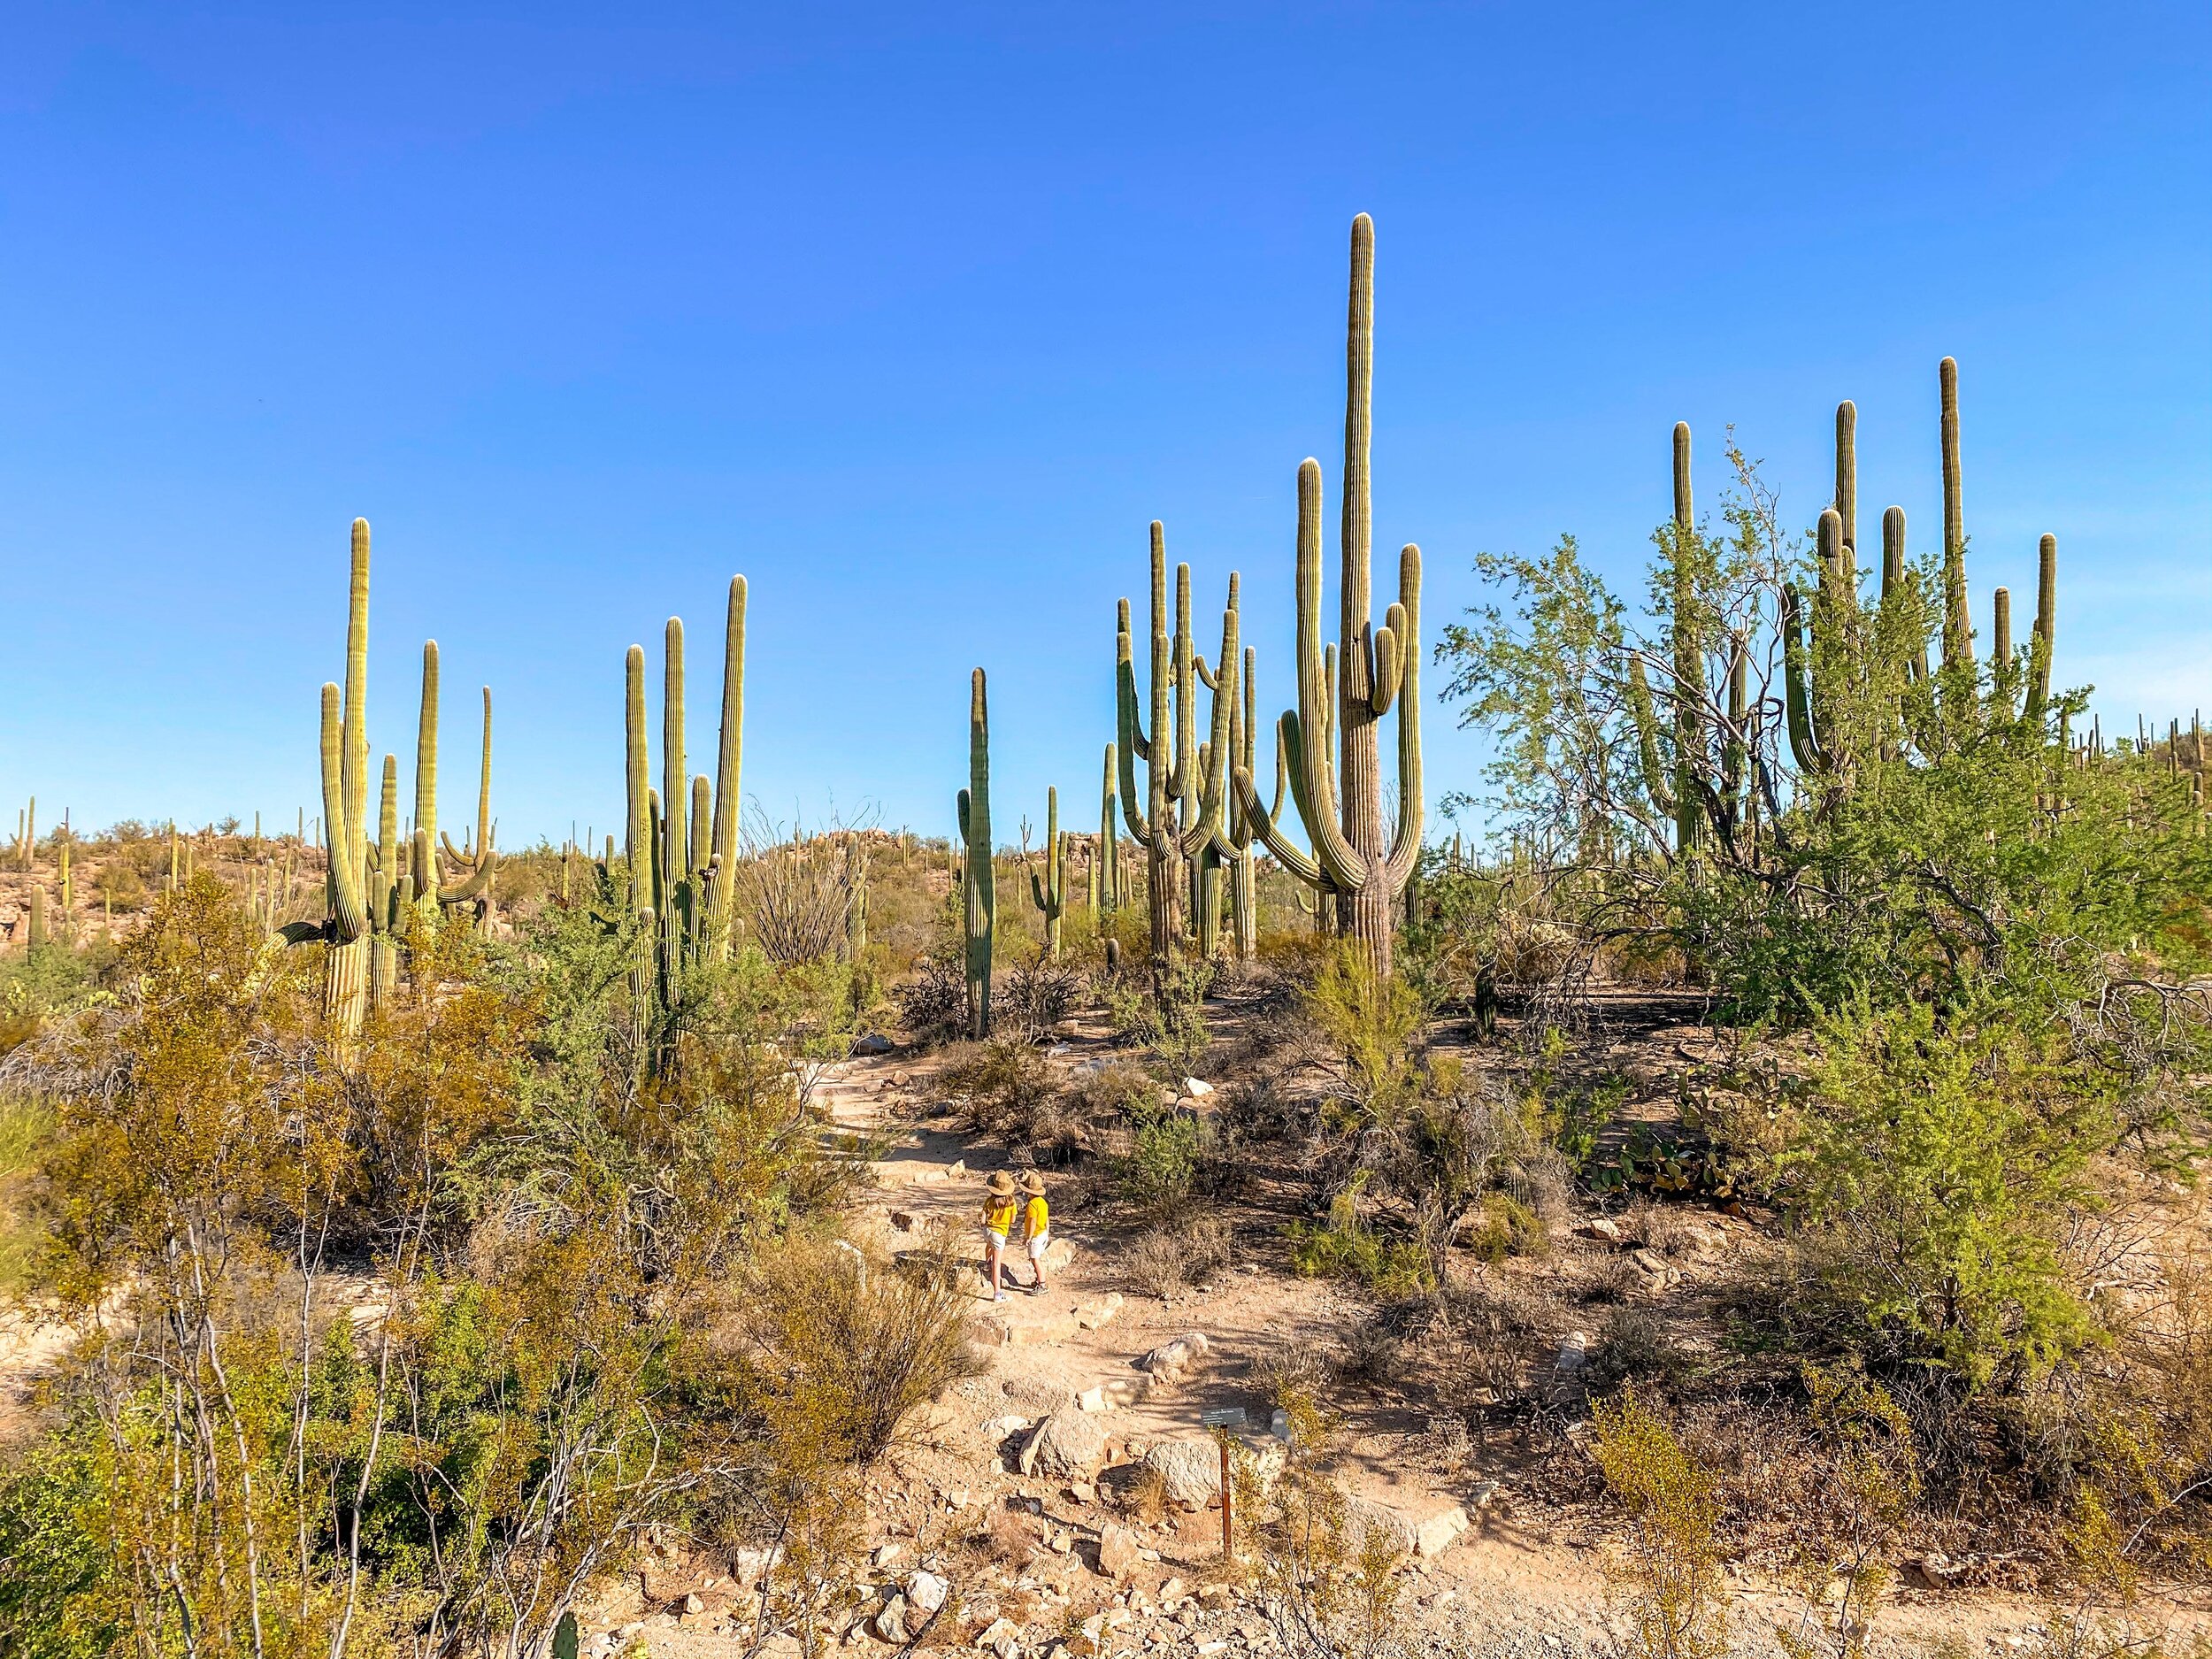 Visiting Saguaro National Park with Little Kids — A Mom Explores